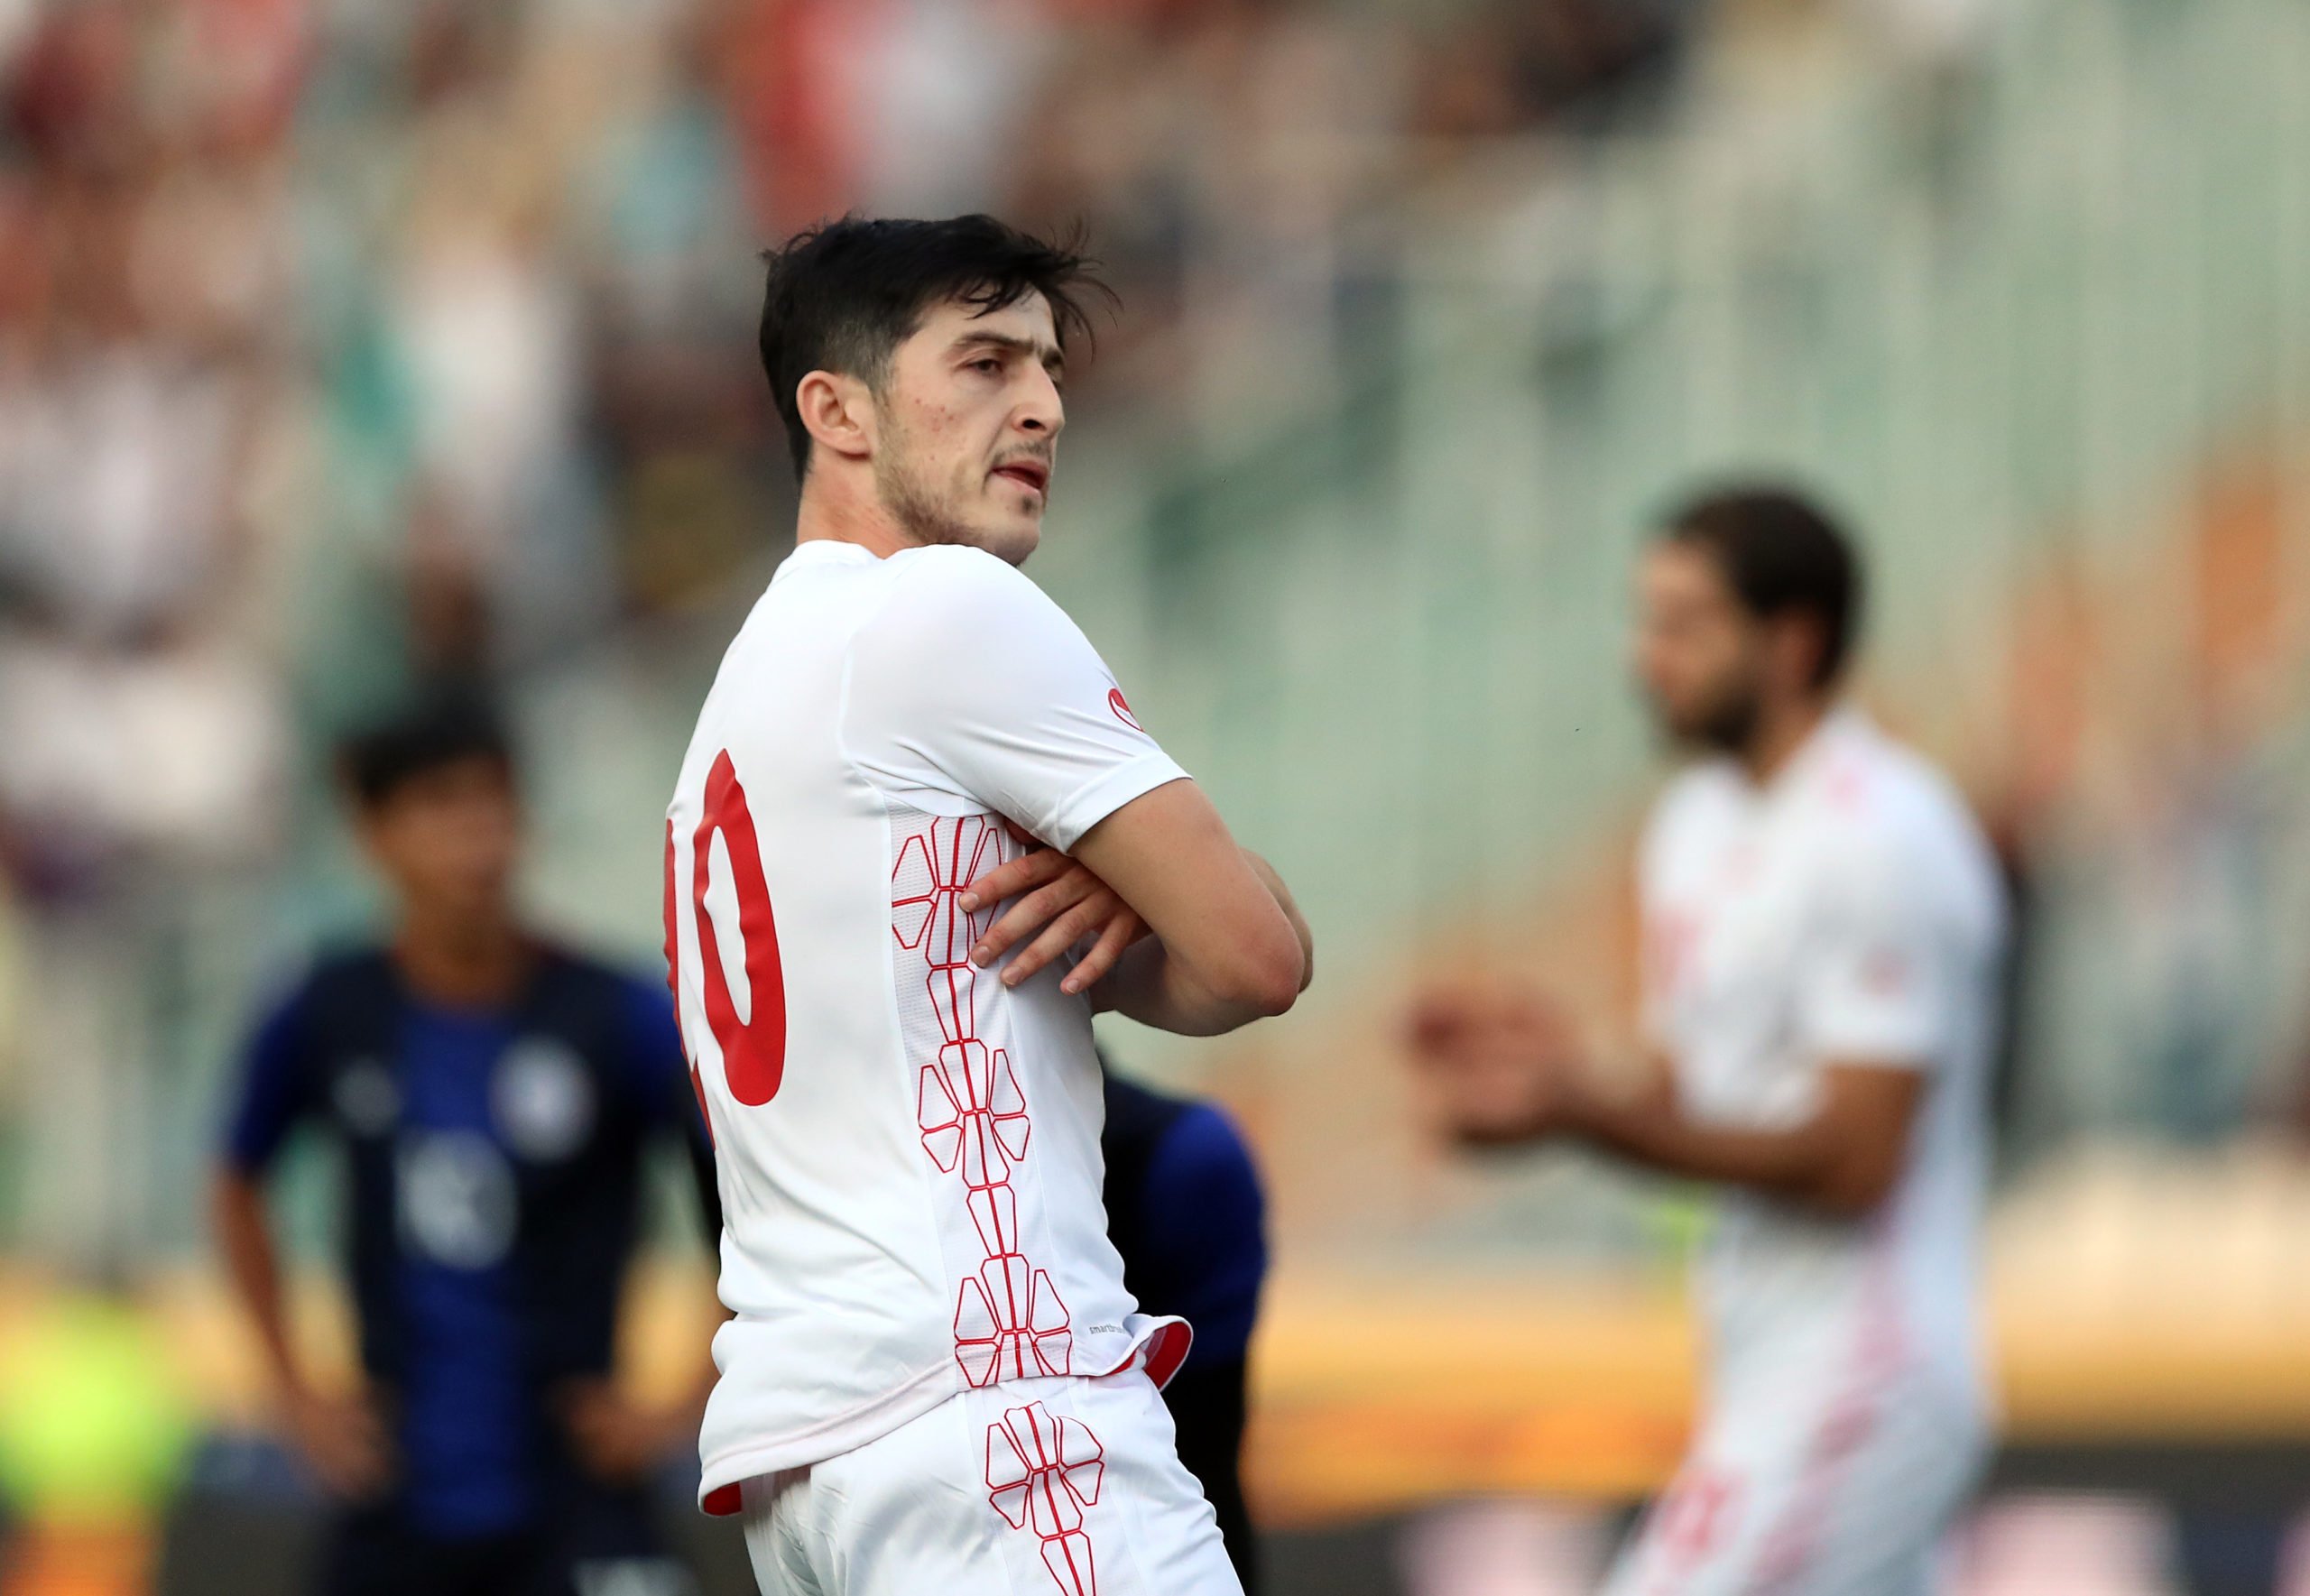 Arsenal have entered the market for Sardar Azmoun - The one they need.